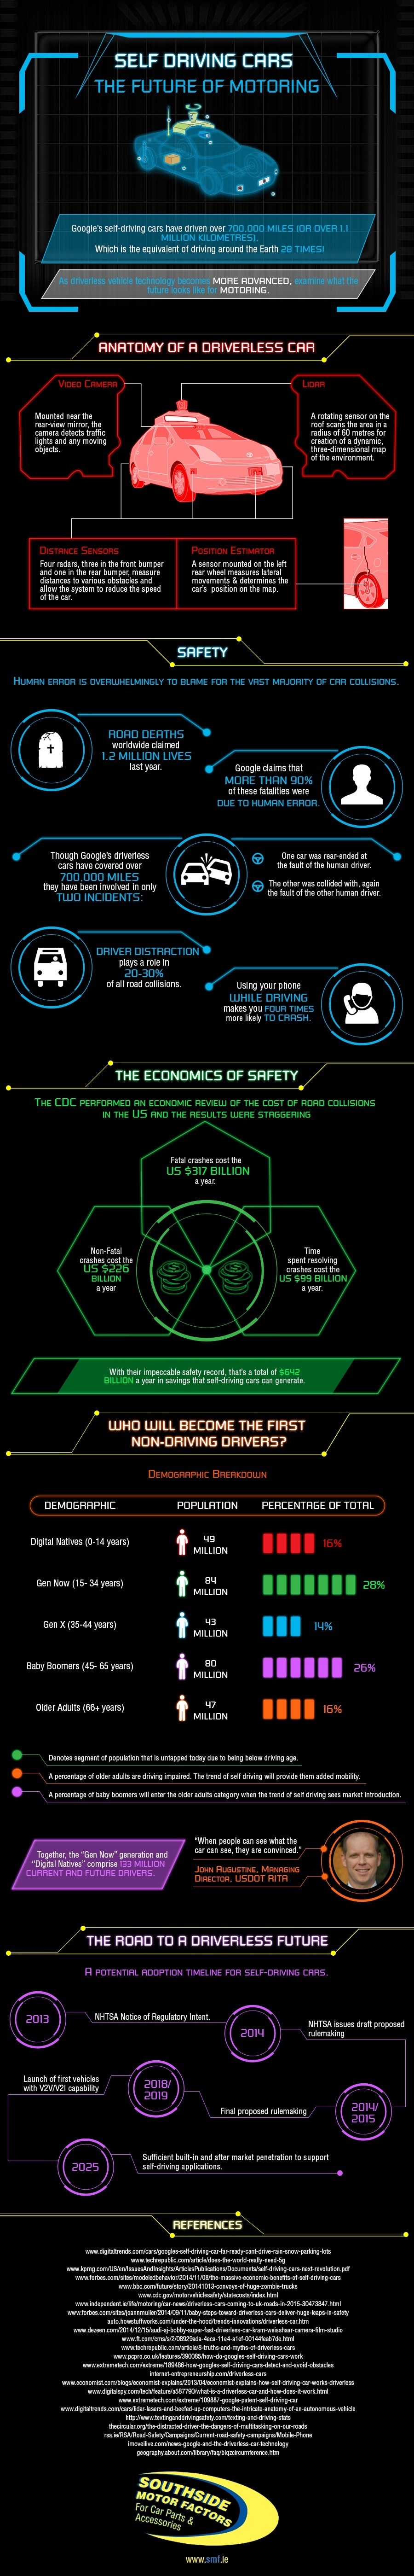 self-driving cars infographic